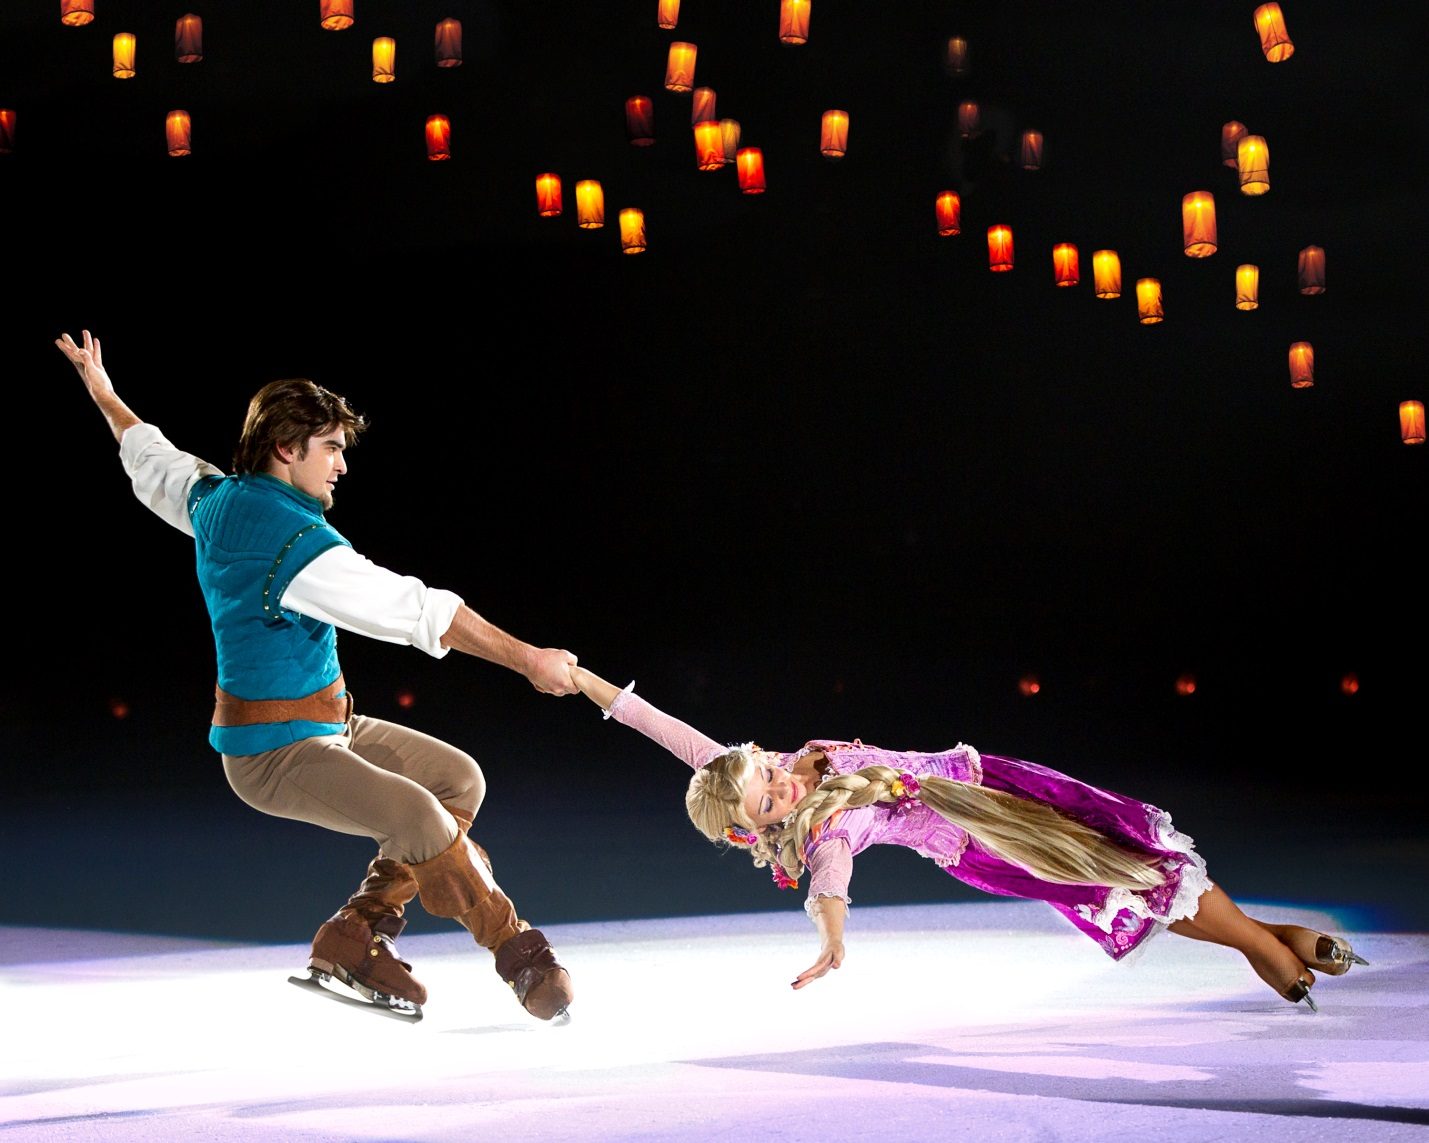 RAPUNZEL. Rapunzel and Flynn Rider of Disney's 'Rapunzel' are brought to life in Disney on Ice. Photo courtesy of FleishmanHillard 